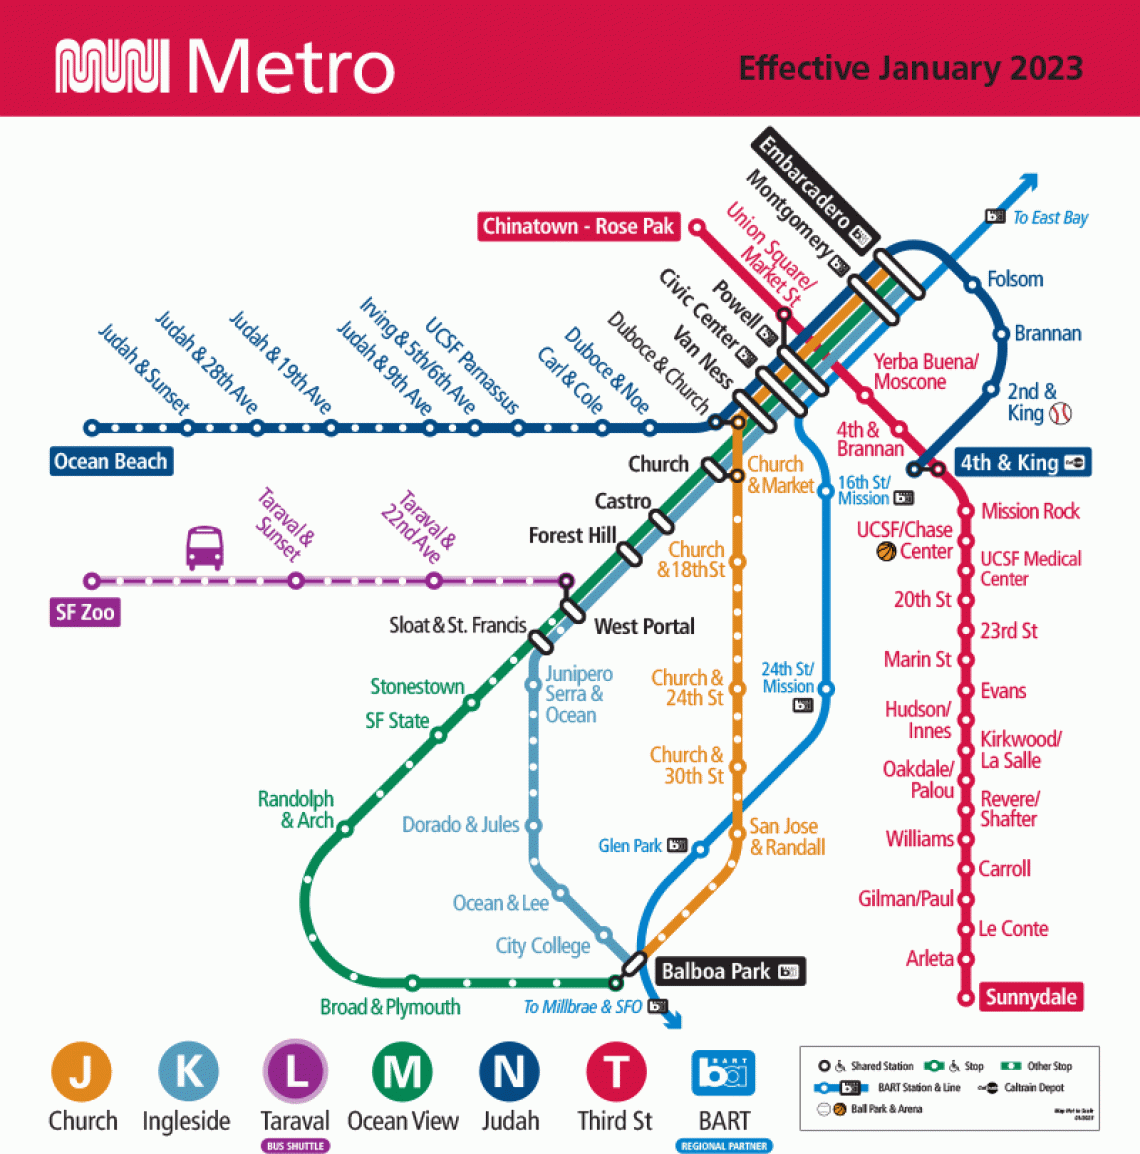 A map shows the subway network for San Francisco's Muni Metro system.